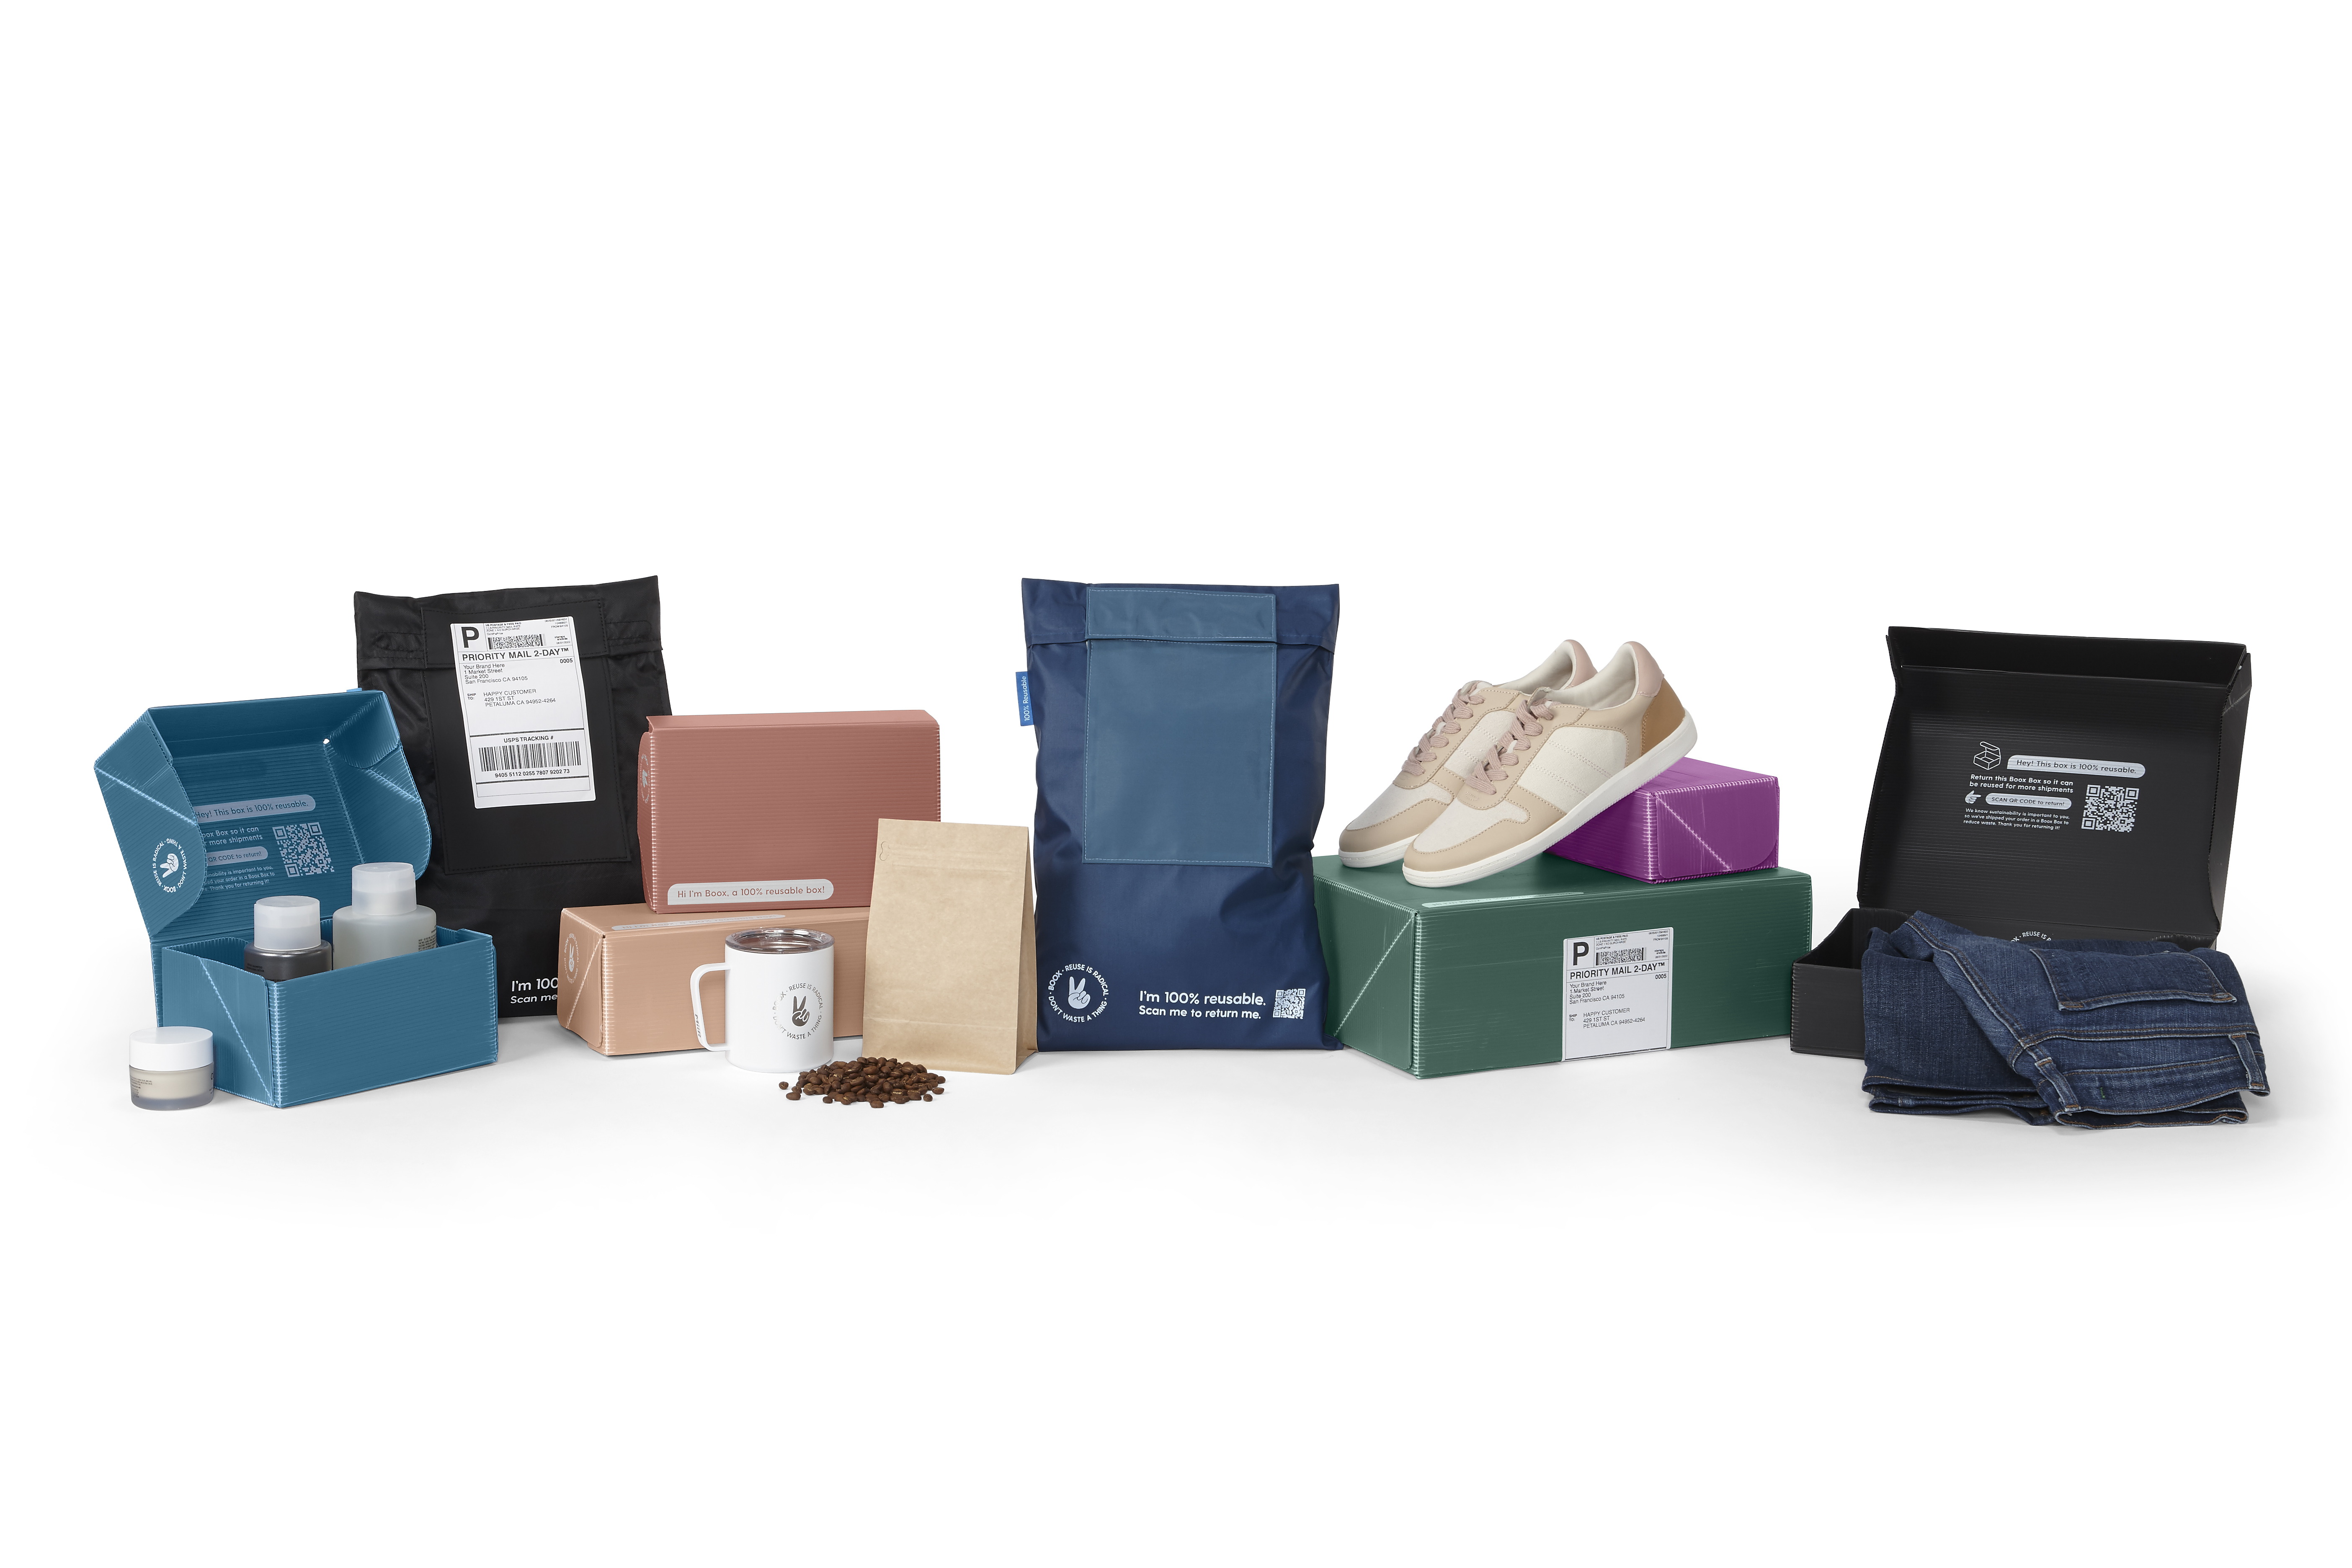 How reusable packaging companies like Boox are pitching startups